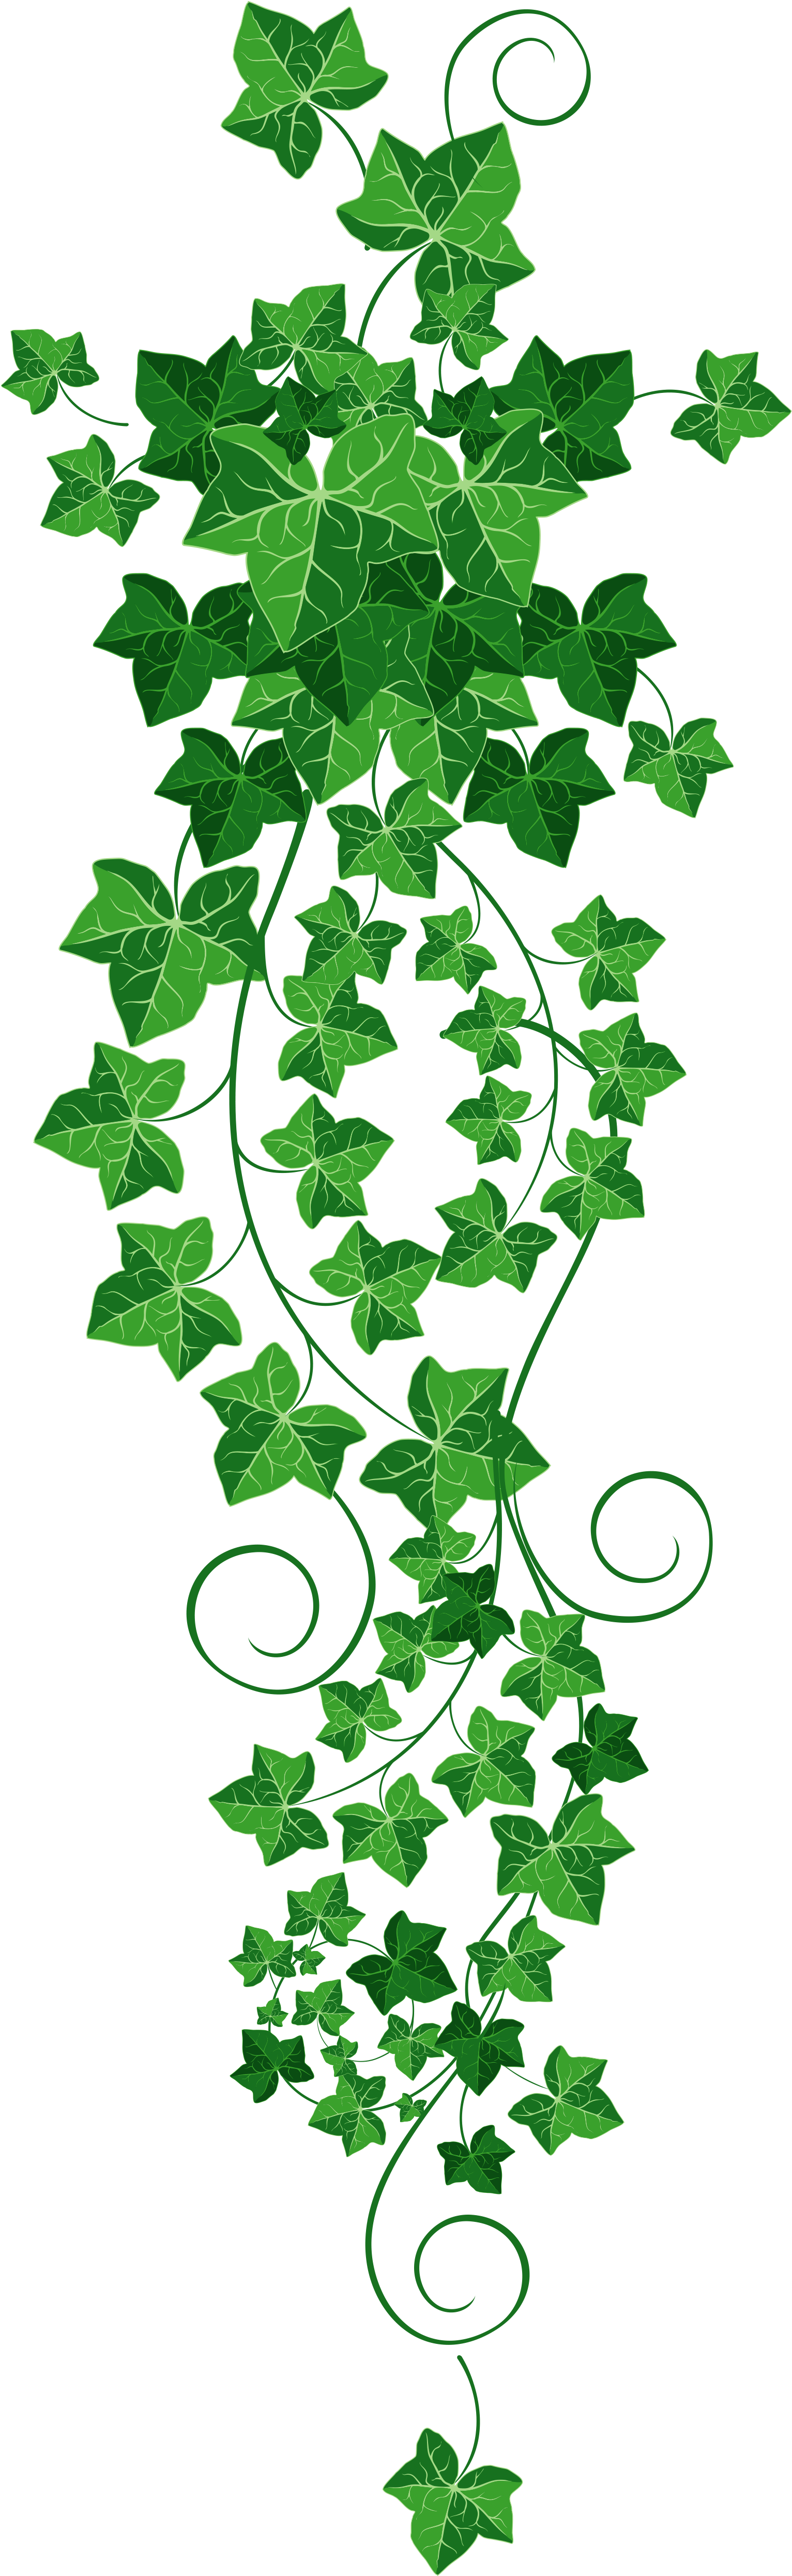 Green Ivy Vine Graphic PNG